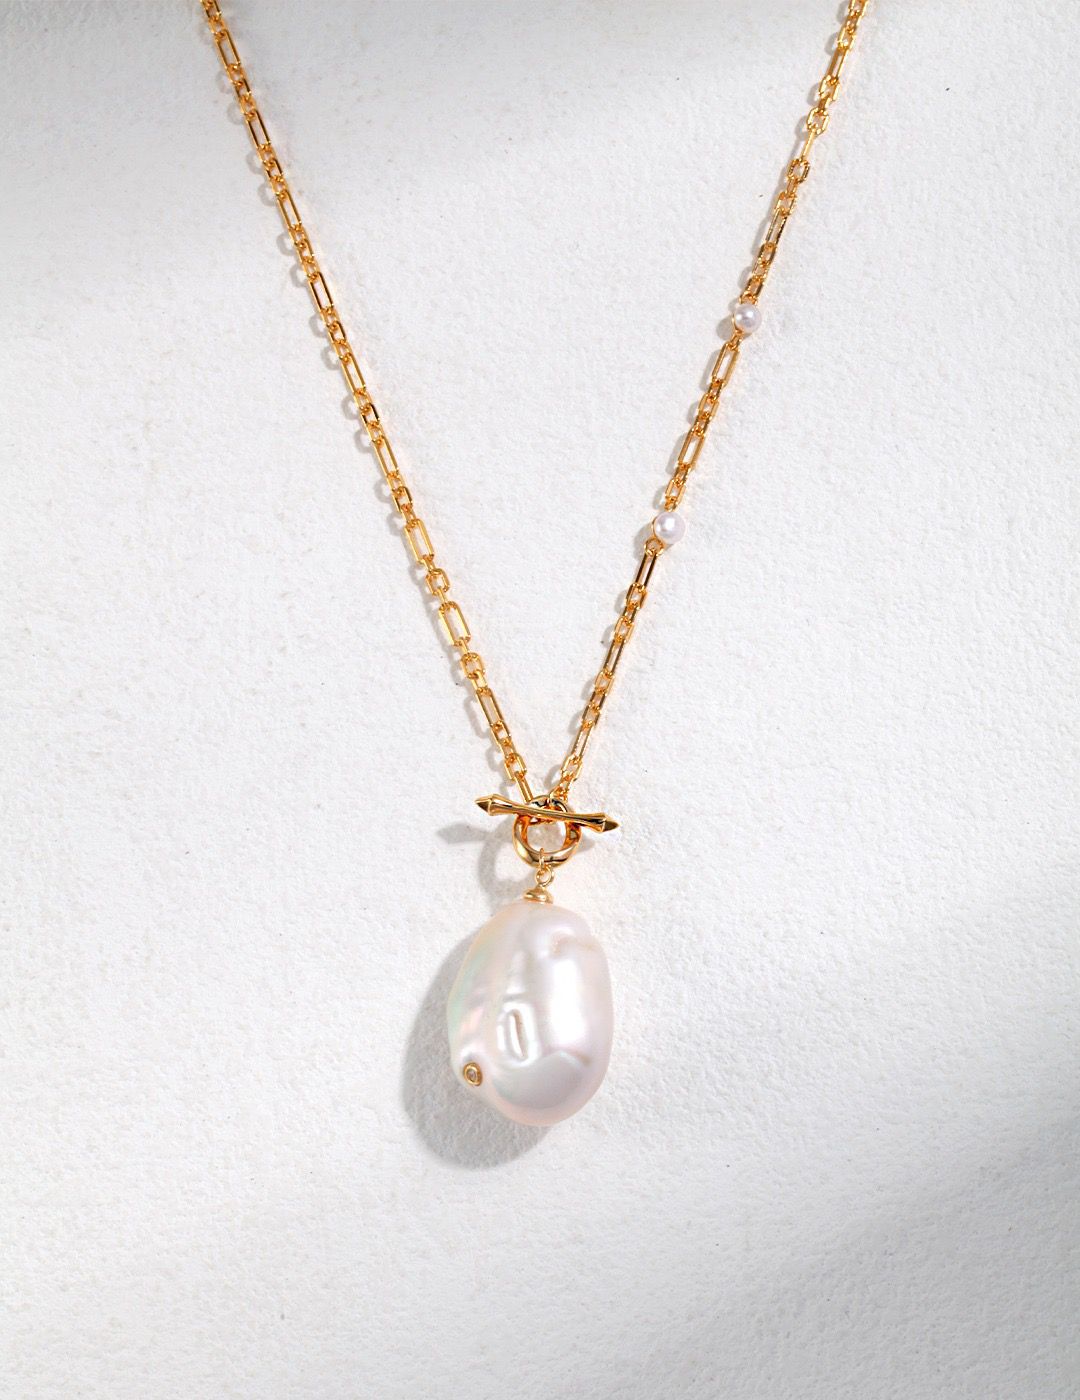 Add classic elegance to any outfit with our Timeless Baroque Pearl Pendant Necklace. Featuring a lustrous freshwater pearl with an irregular shape, suspended on a delicate metal chain. Perfect for any occasion, this necklace is sure to become a treasured addition to your jewelry collection